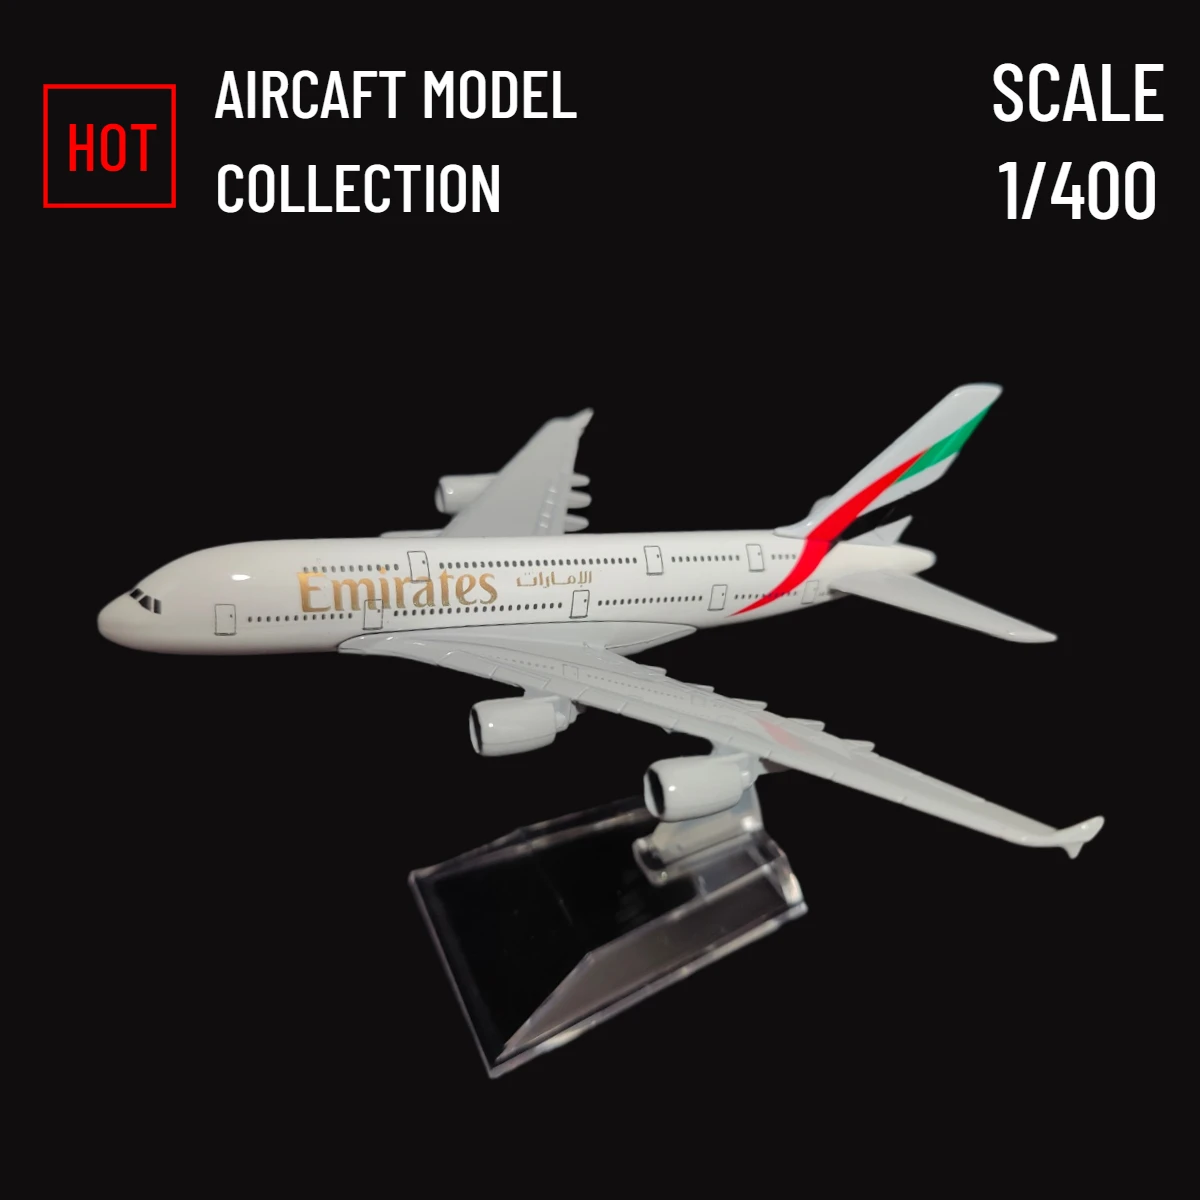 

Scale 1:400 Metal Airplane Replica 15cm Emirates Airlines A380 Aircraft Diecast Model Aviation Collectible Miniature Ornament